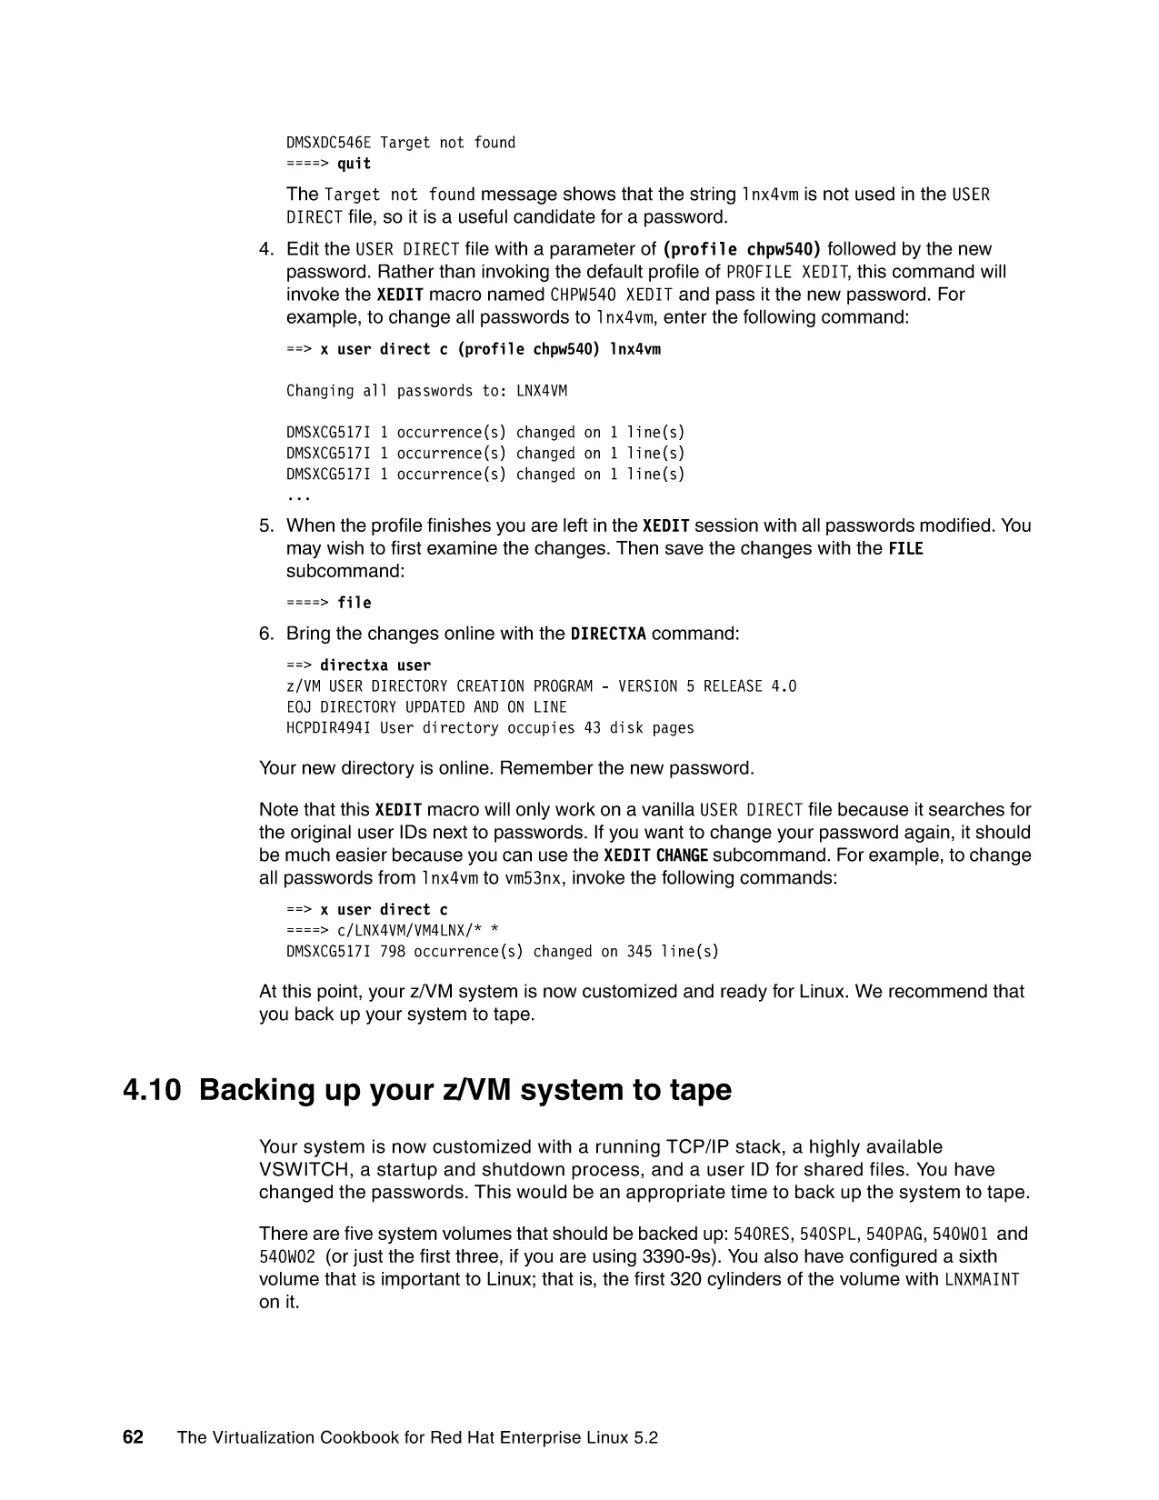 4.10 Backing up your z/VM system to tape